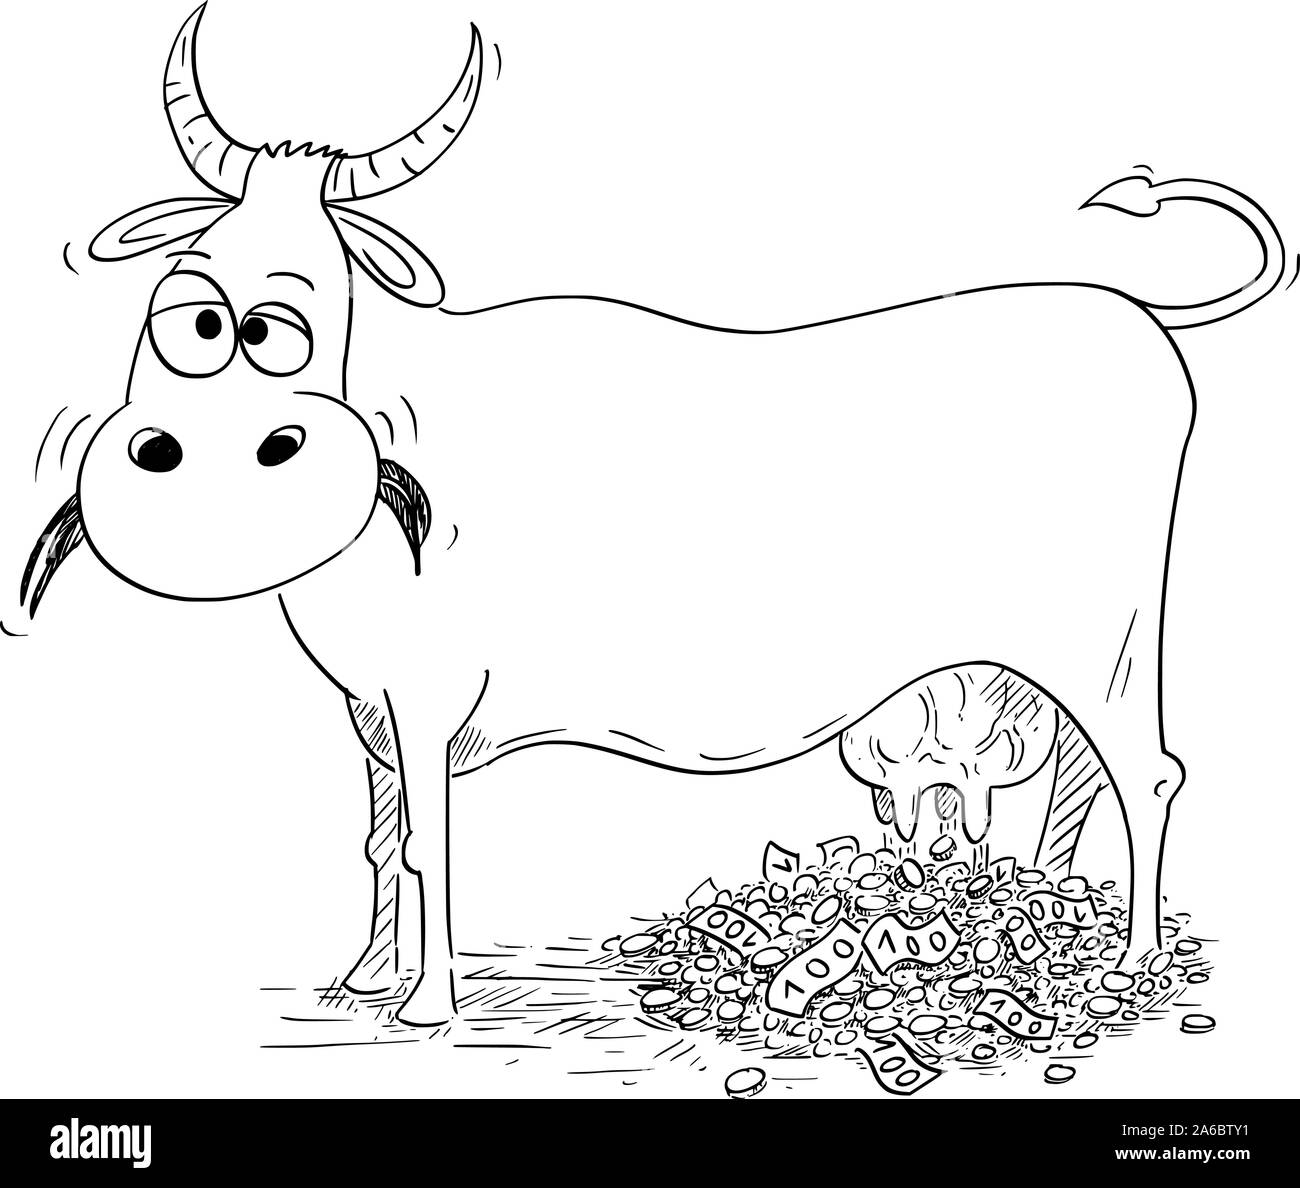 Vector cartoon stick figure drawing conceptual illustration of cash cow giving or milking money. Concept of cash generating product. Stock Vector